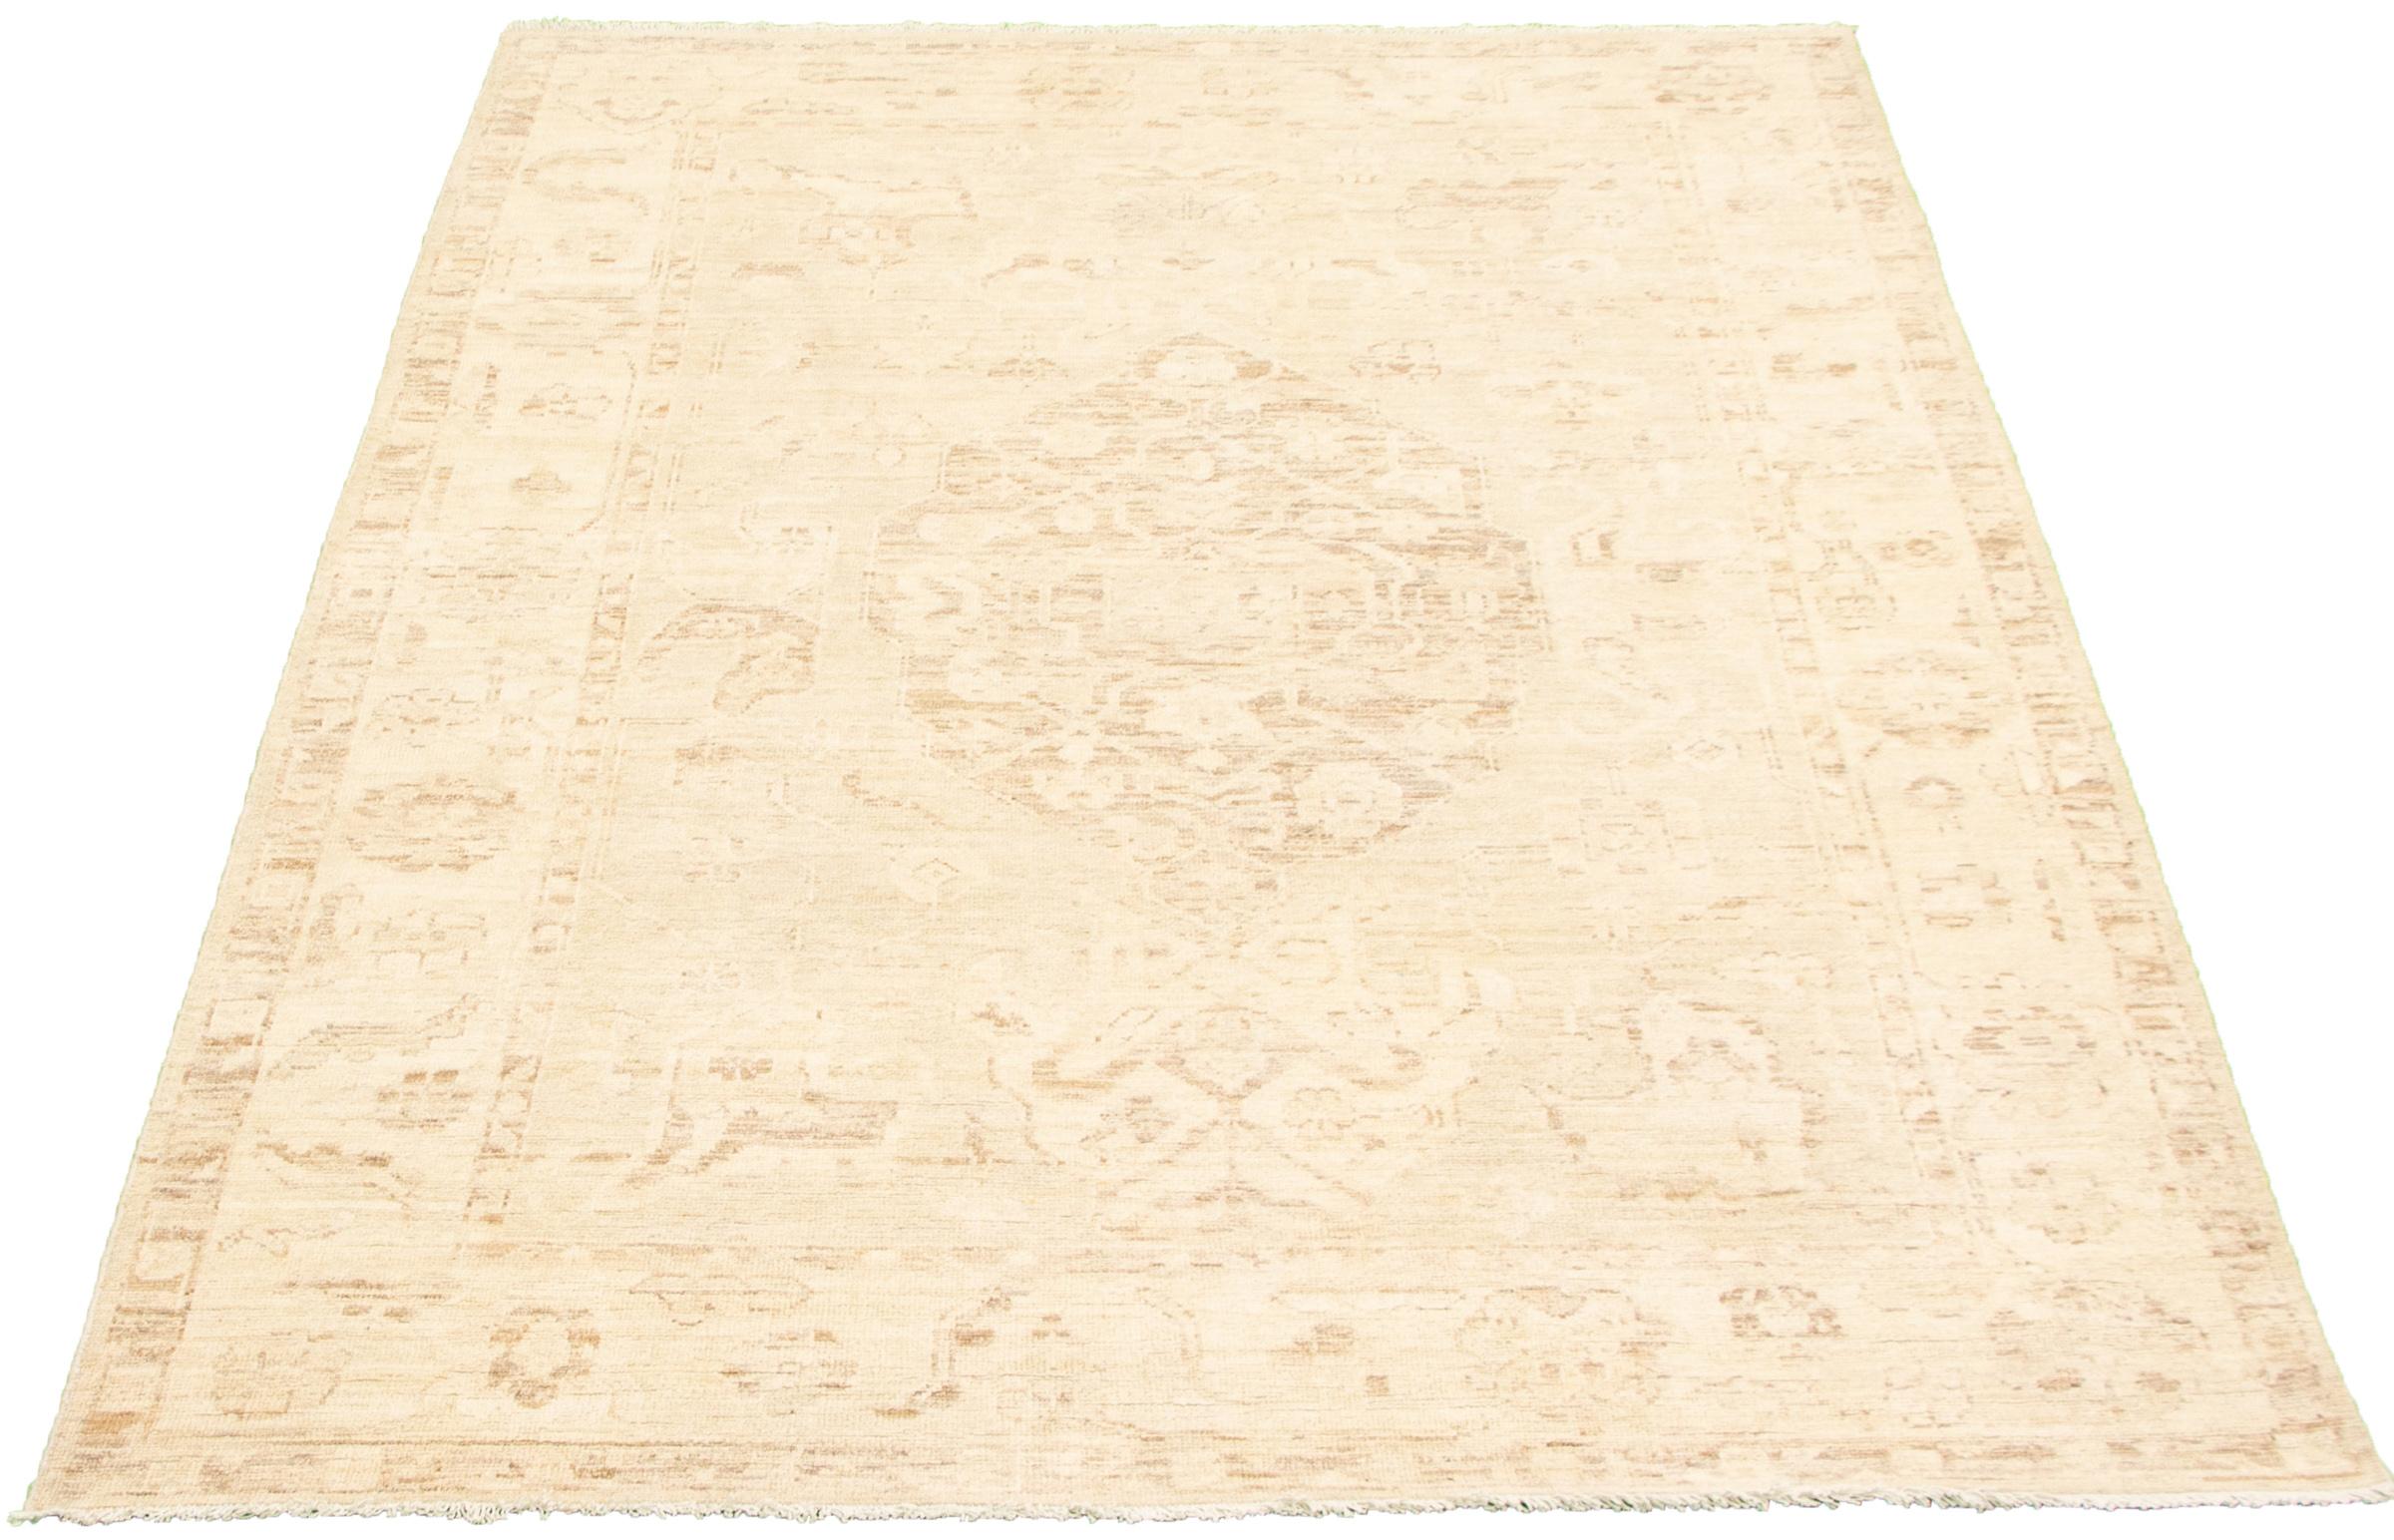 Vegetable Dyed Formal and Subdued Transitional Wool Persian Oushak Carpet, 6' x 9' For Sale